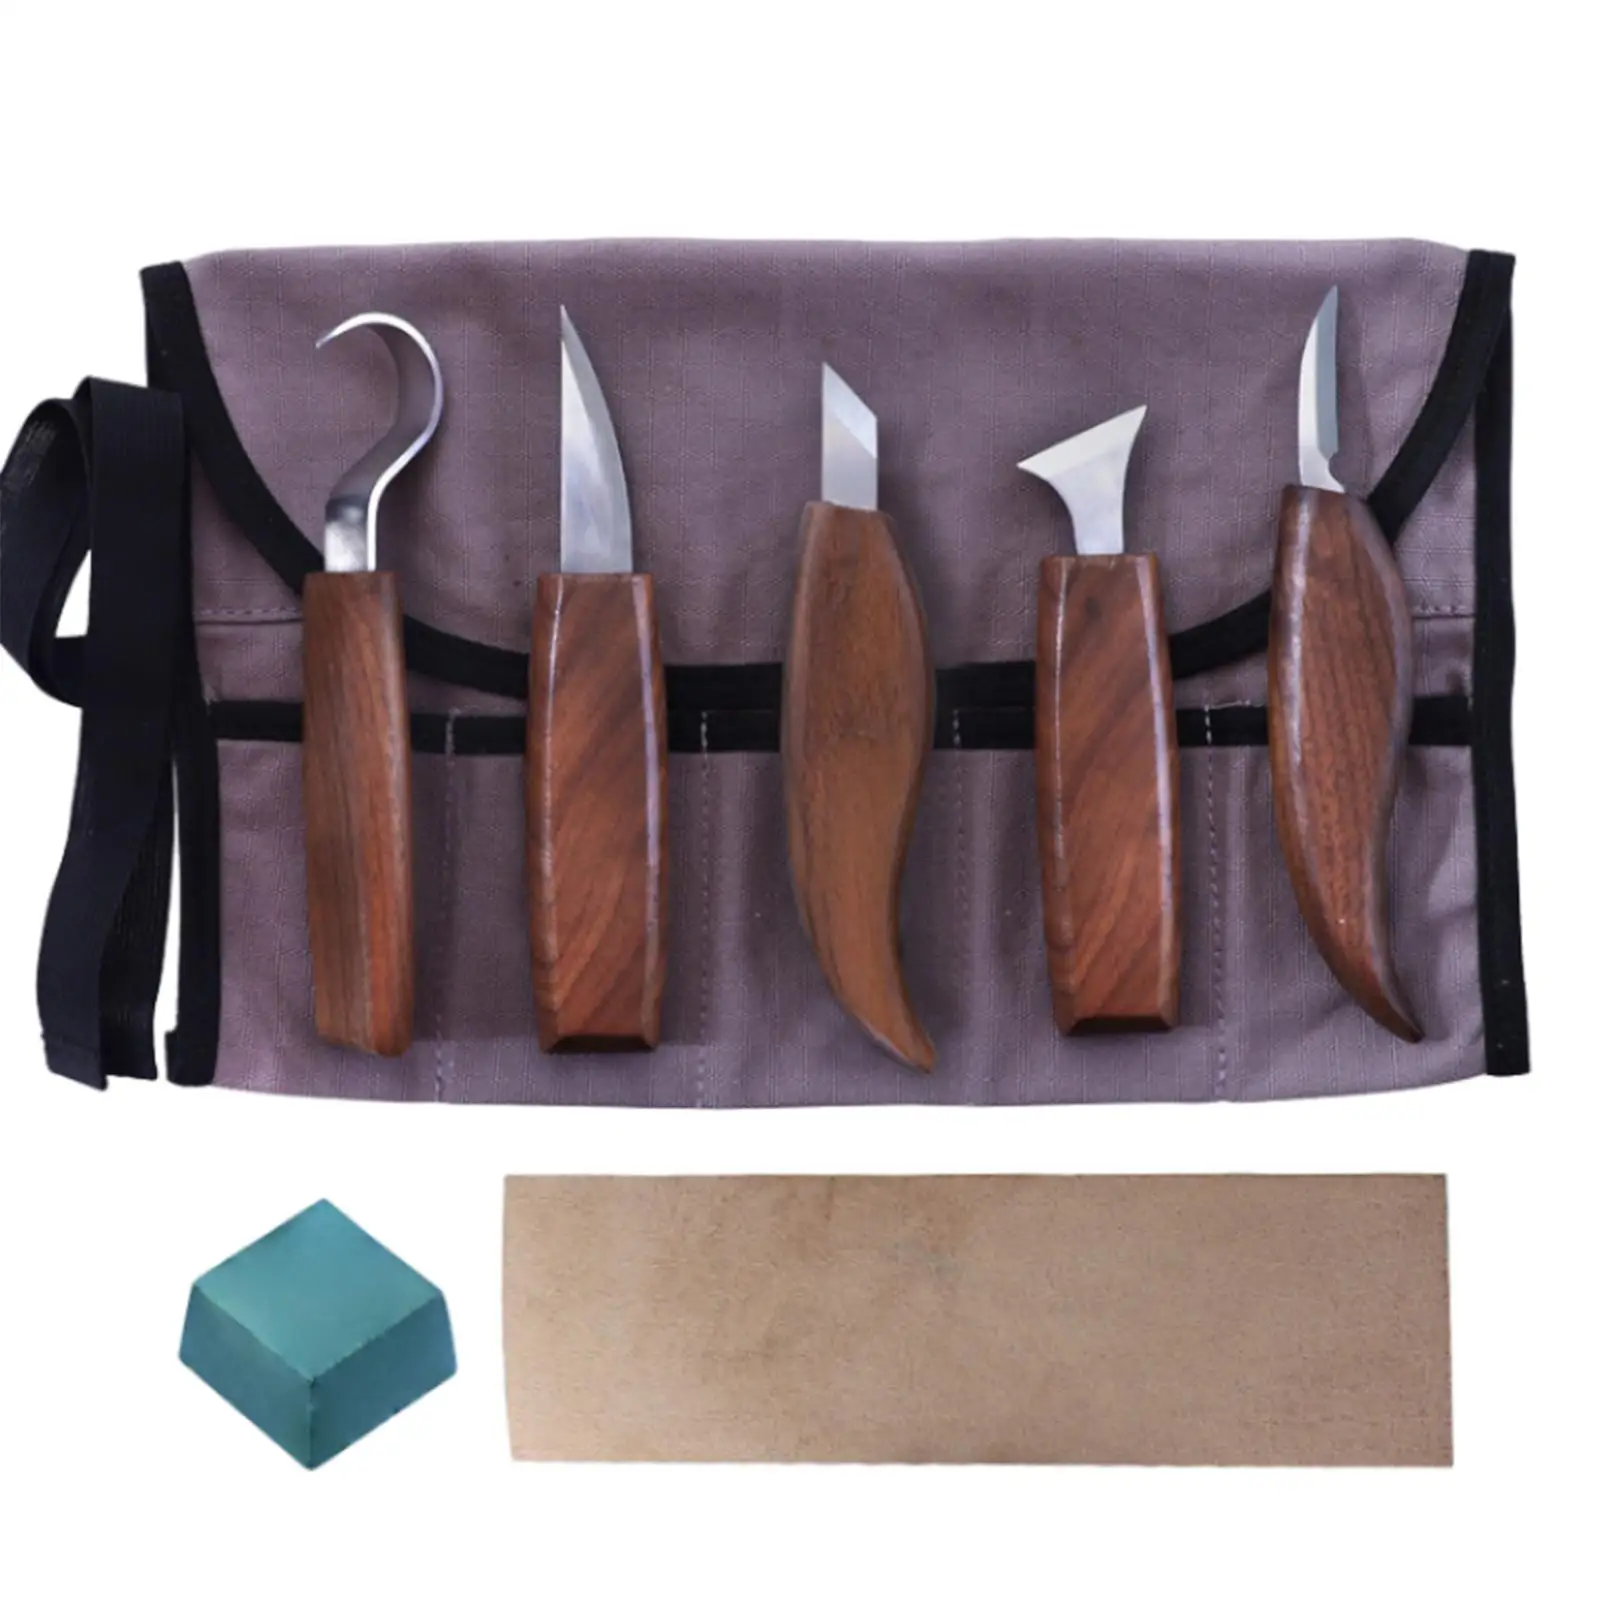 8x Wood Carving Kits with Storage Bag Fine Carving Wear Resistant Woodworking DIY Carving Tool for Paper Carving Plaster Carving